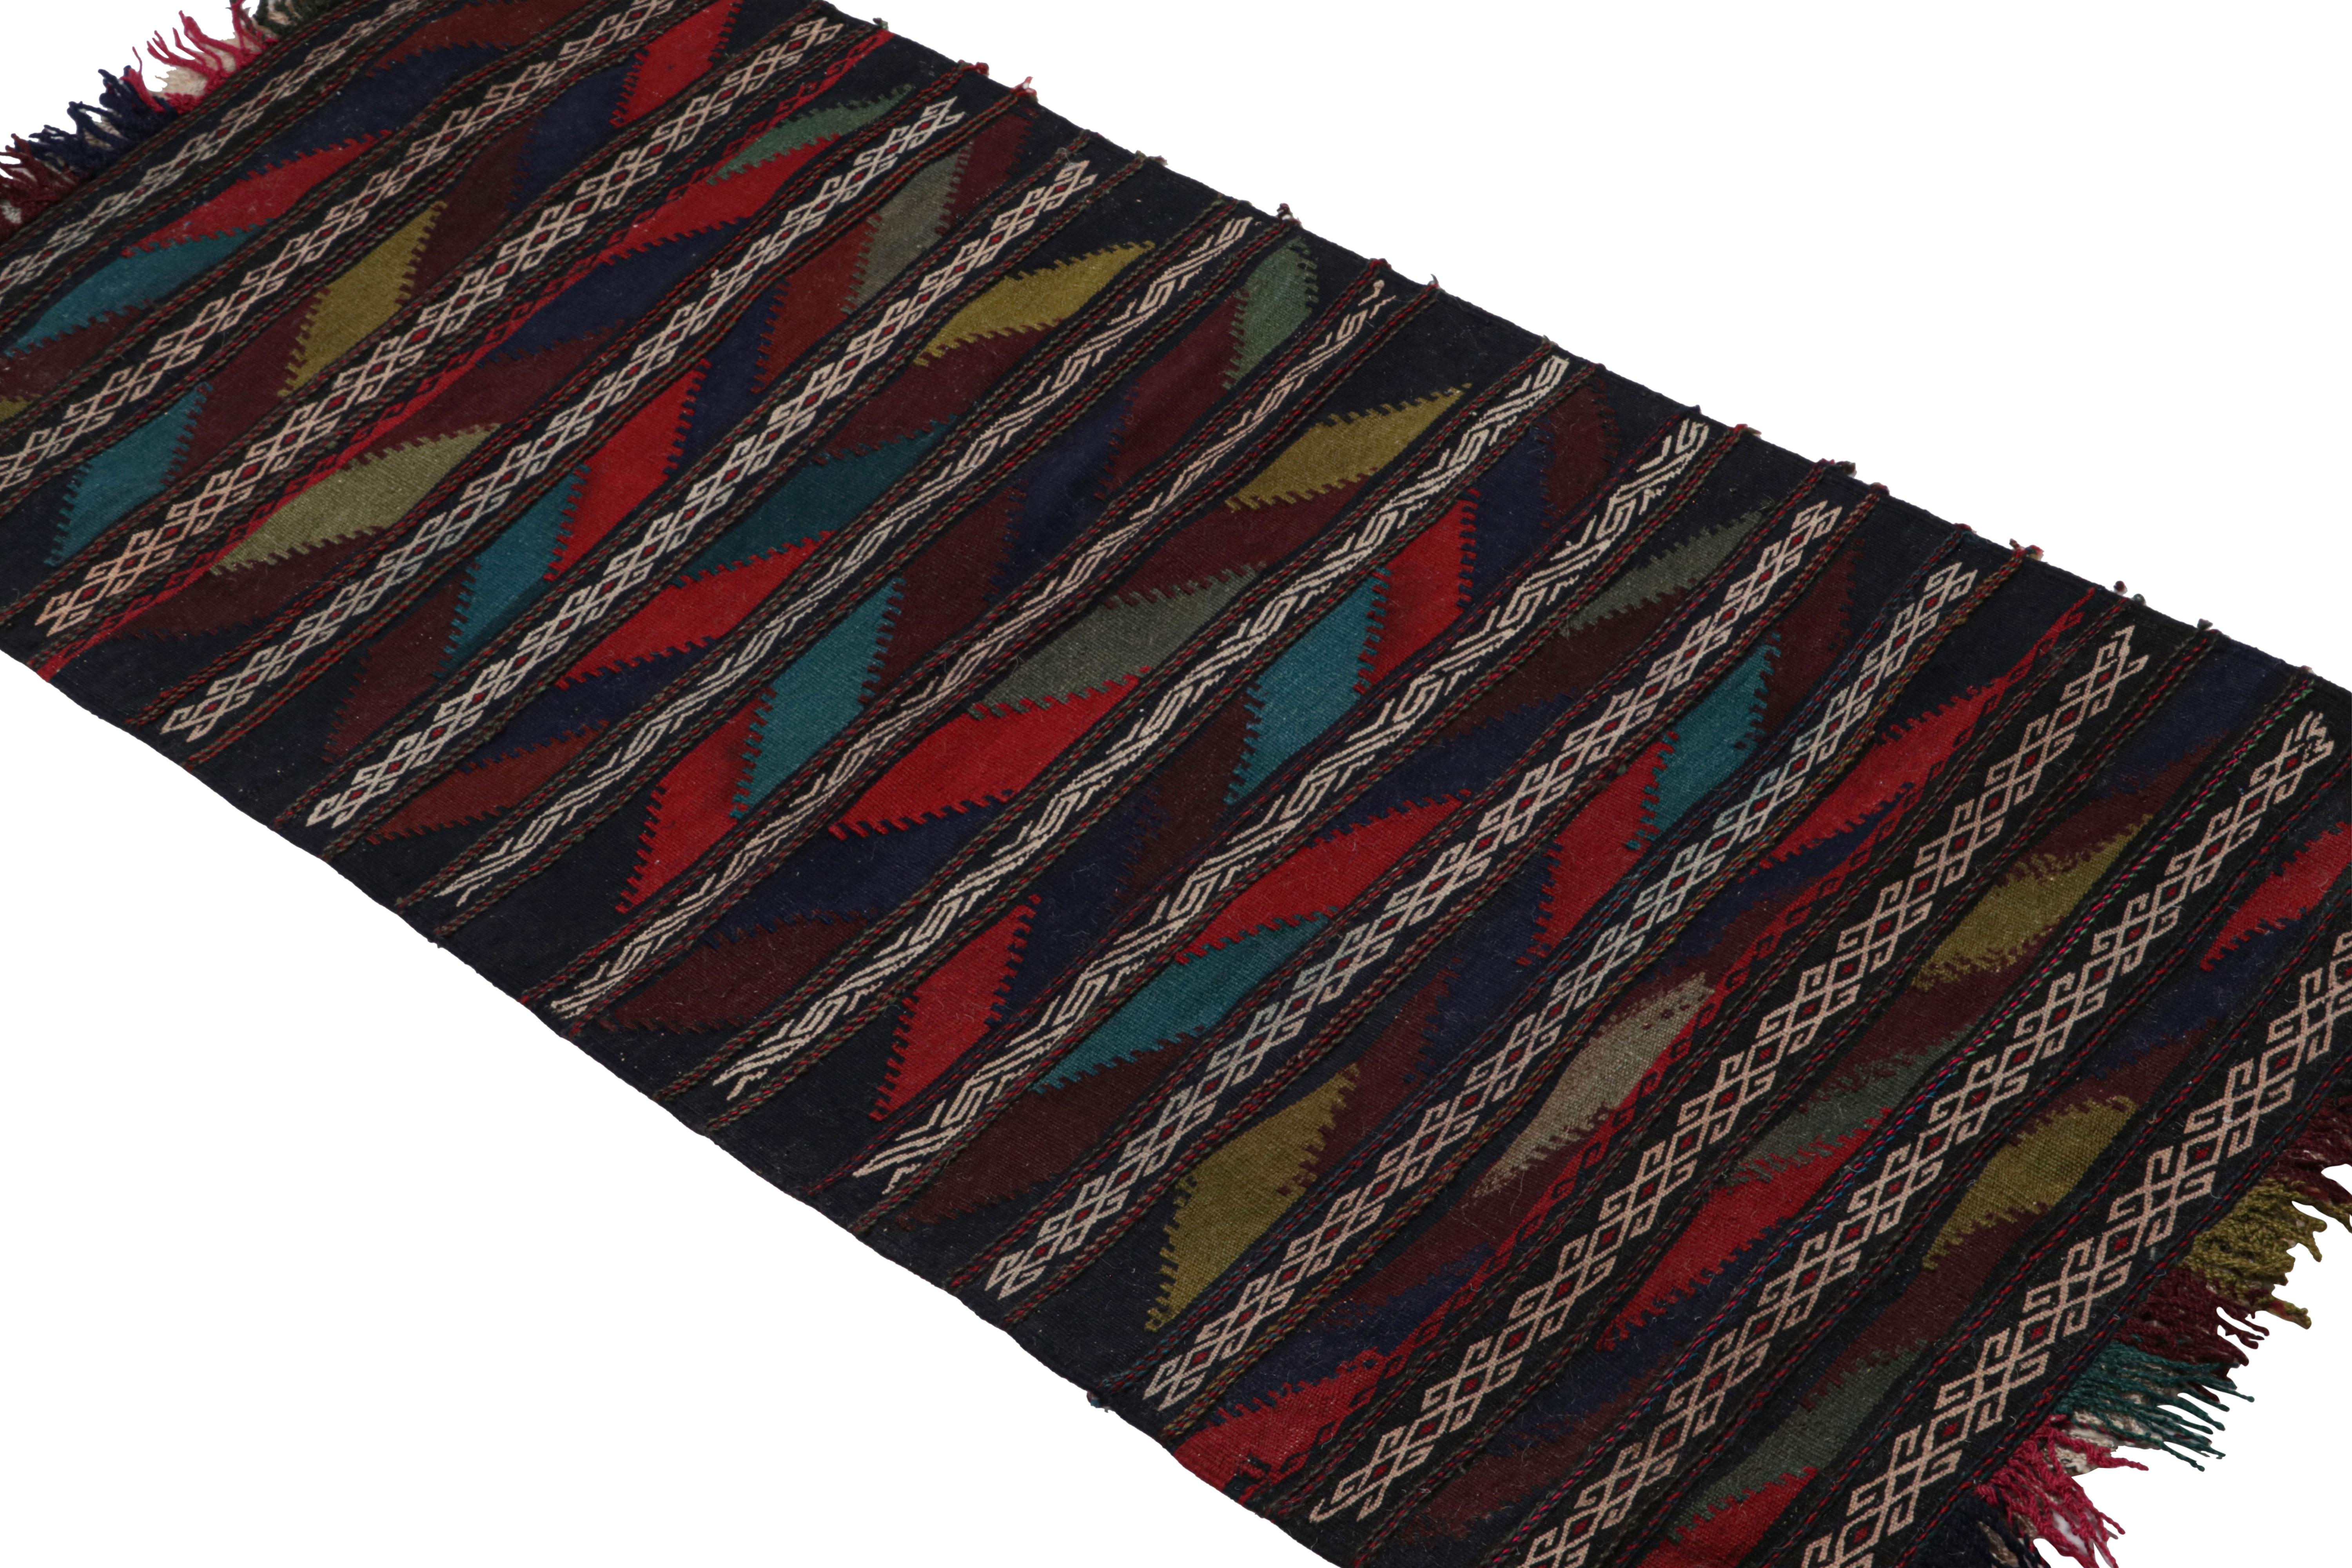 Handwoven in wool circa 1950-1960, this vintage 2x4 Afghan kilim and scatter rug is a new acquisition from Rug & Kilim’s mid-century rugs.

On the Design:

The flatweave depicts geometric patterns in a repeat of diagonals and stripes. Though